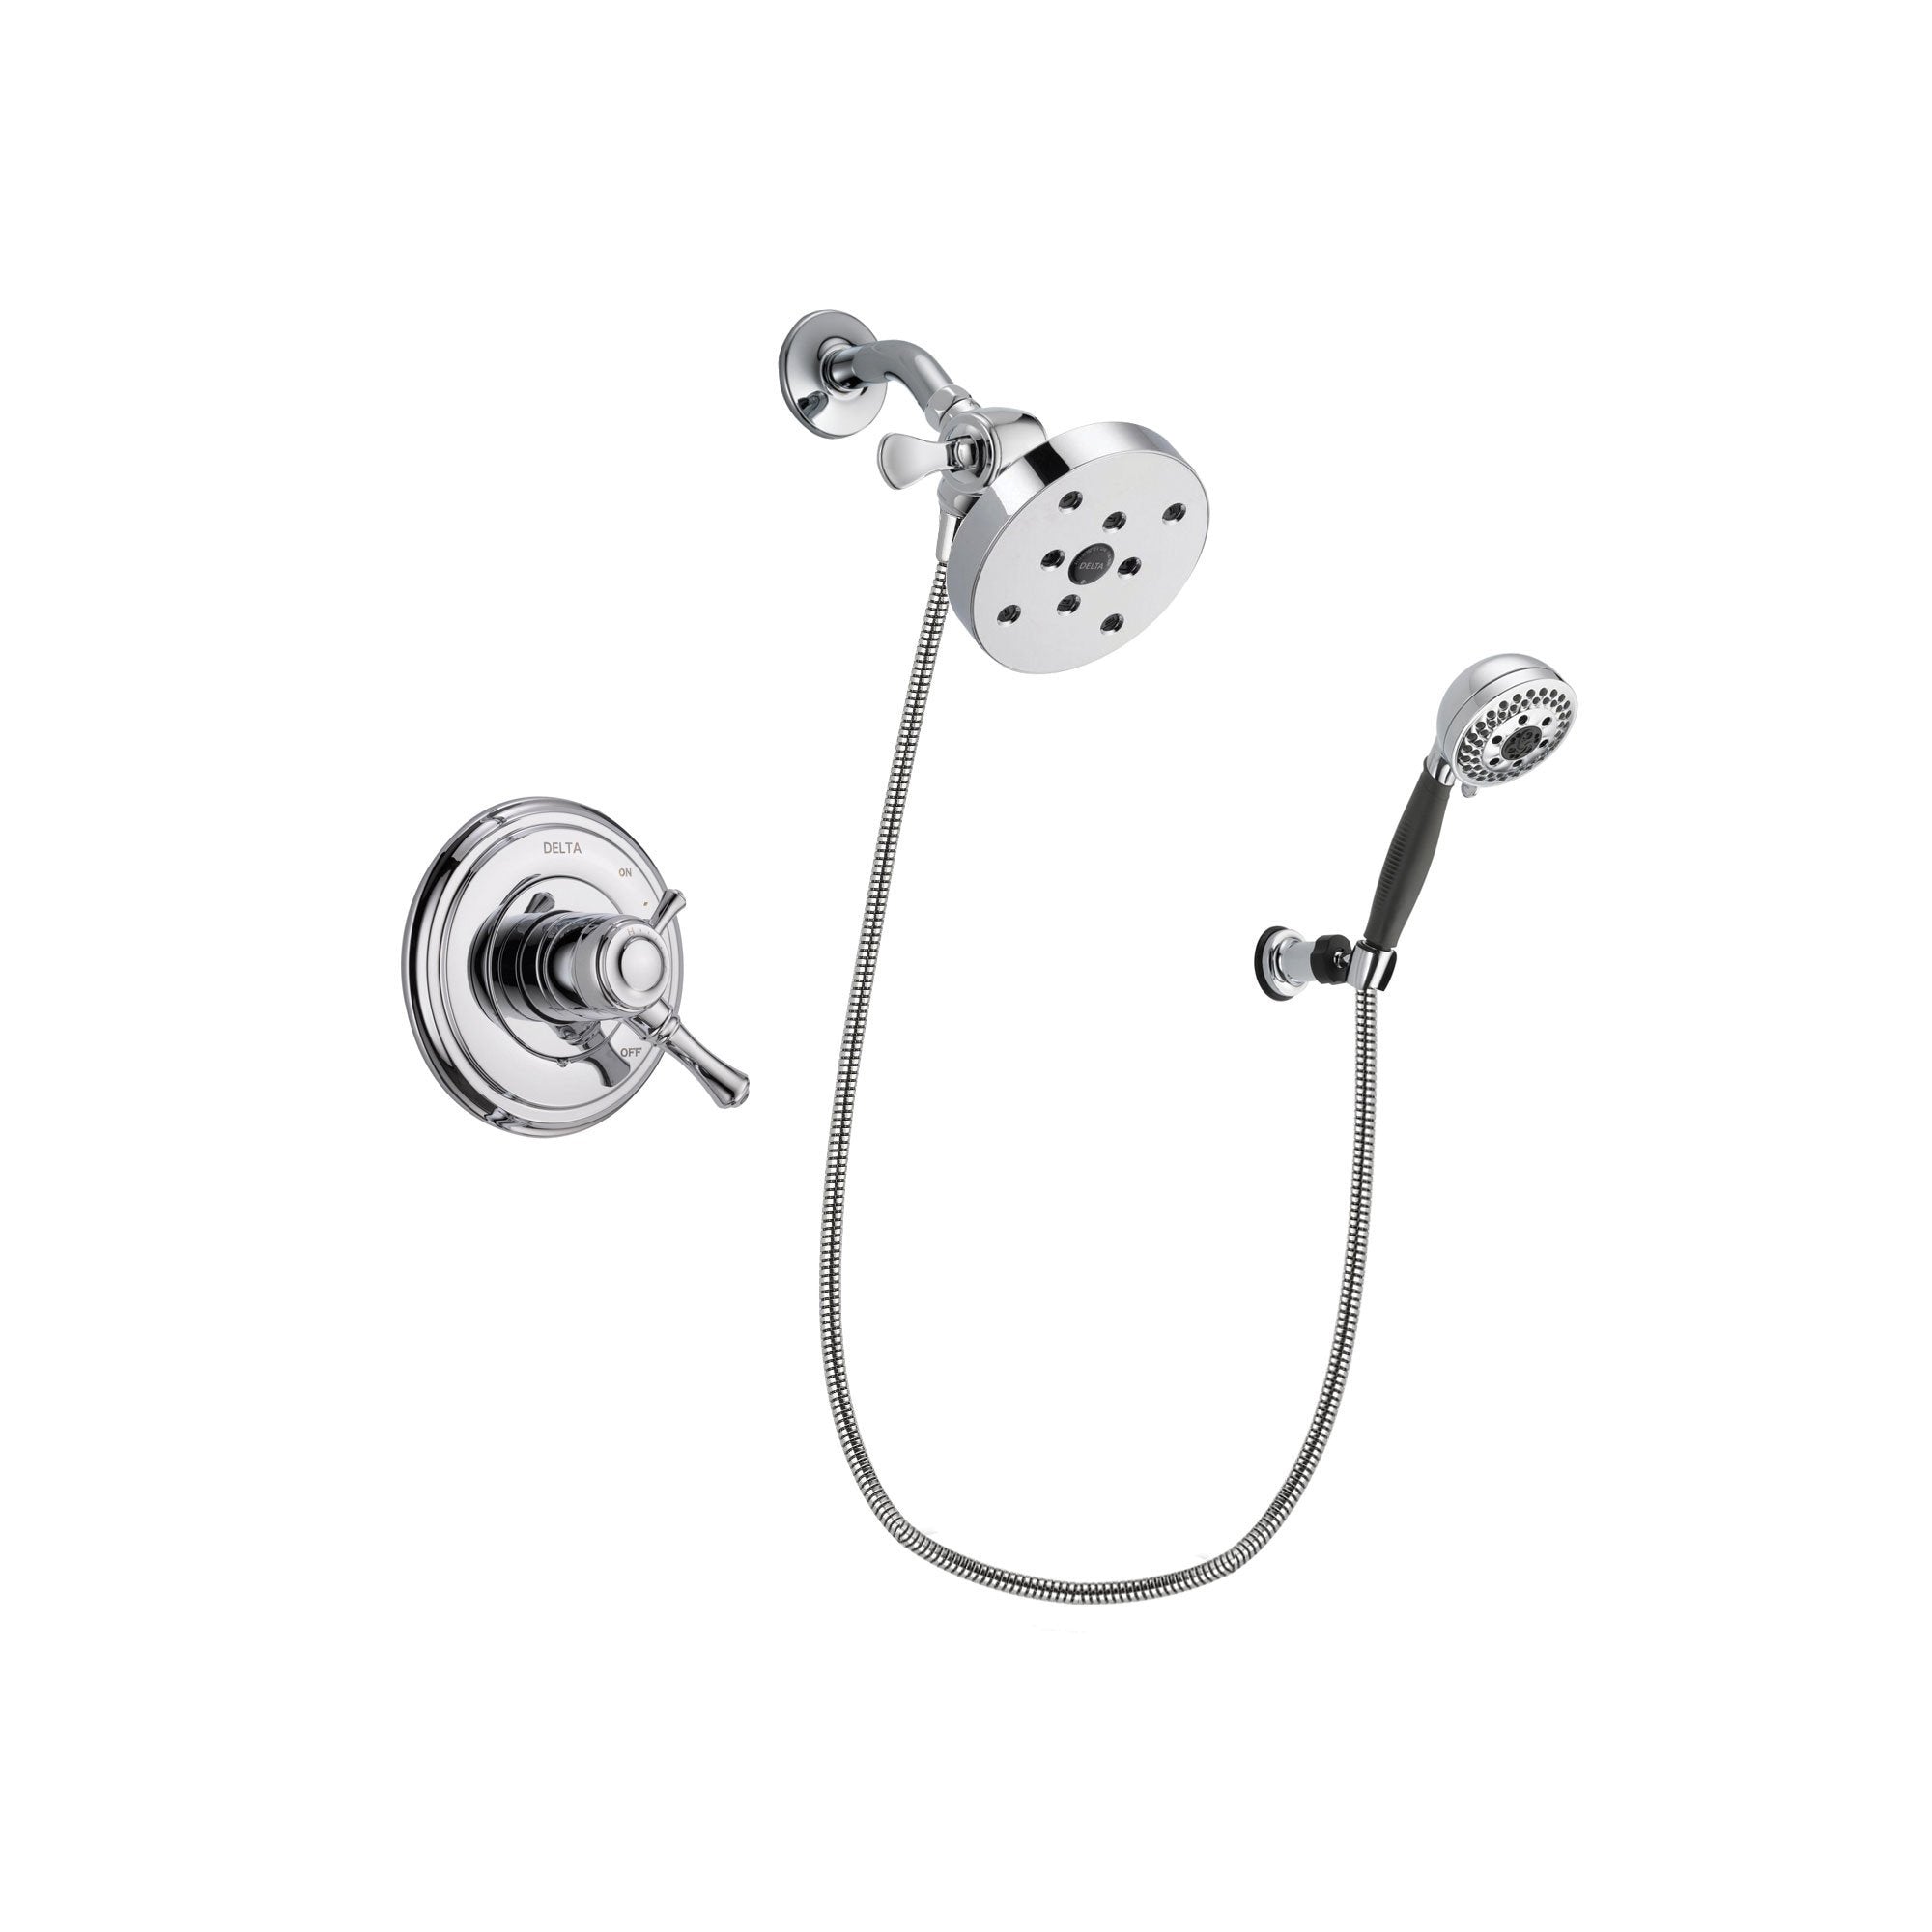 Delta Cassidy Chrome Shower Faucet System w/ Showerhead and Hand Shower DSP1240V